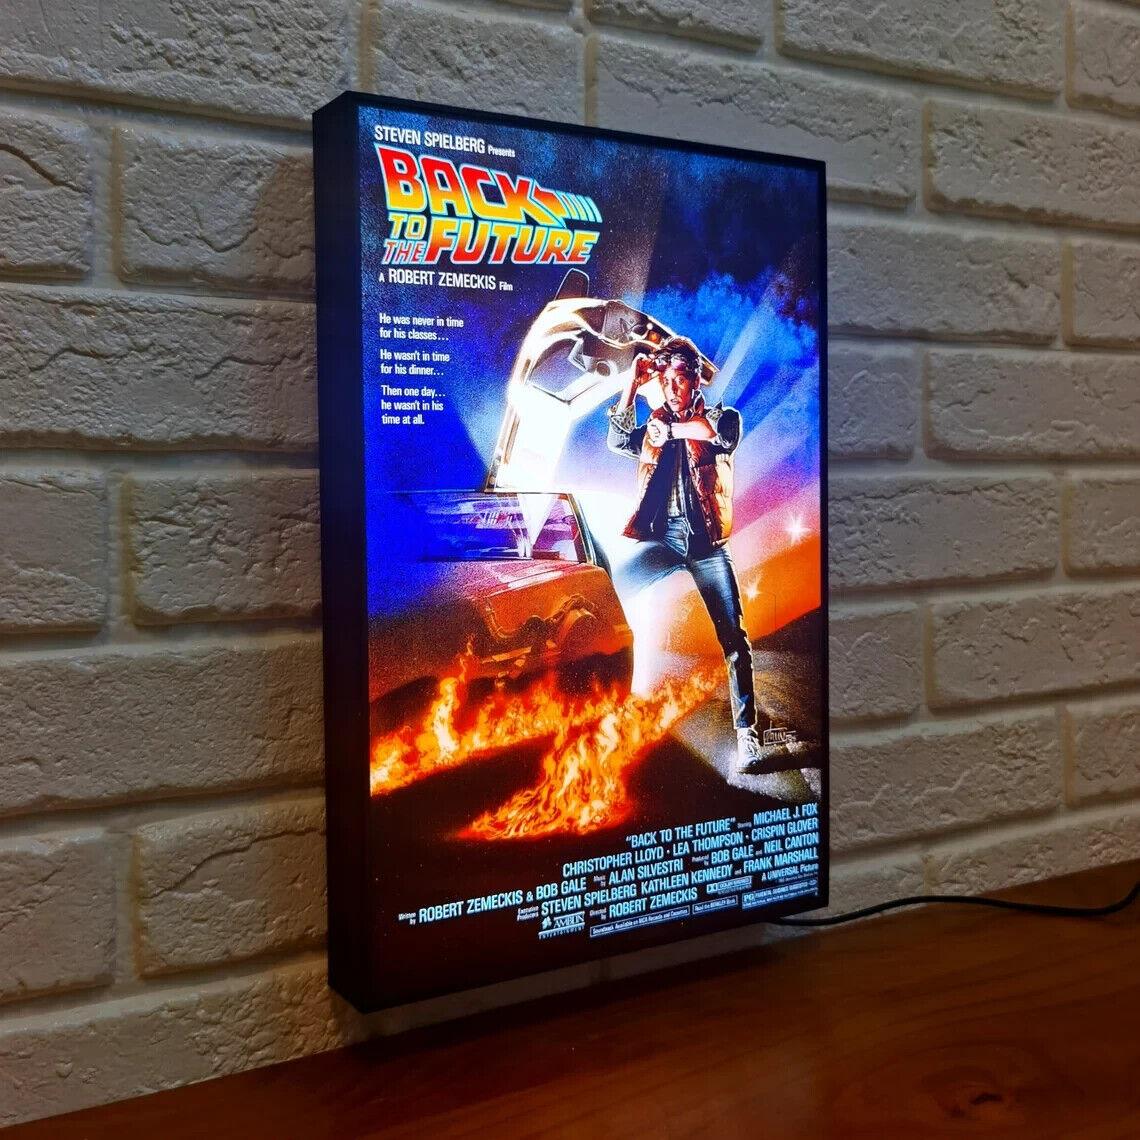 Back To The Future (BTTF) Poster LED Lightbox Fully Dimmable & Powered by USB - FYLZGO Signs